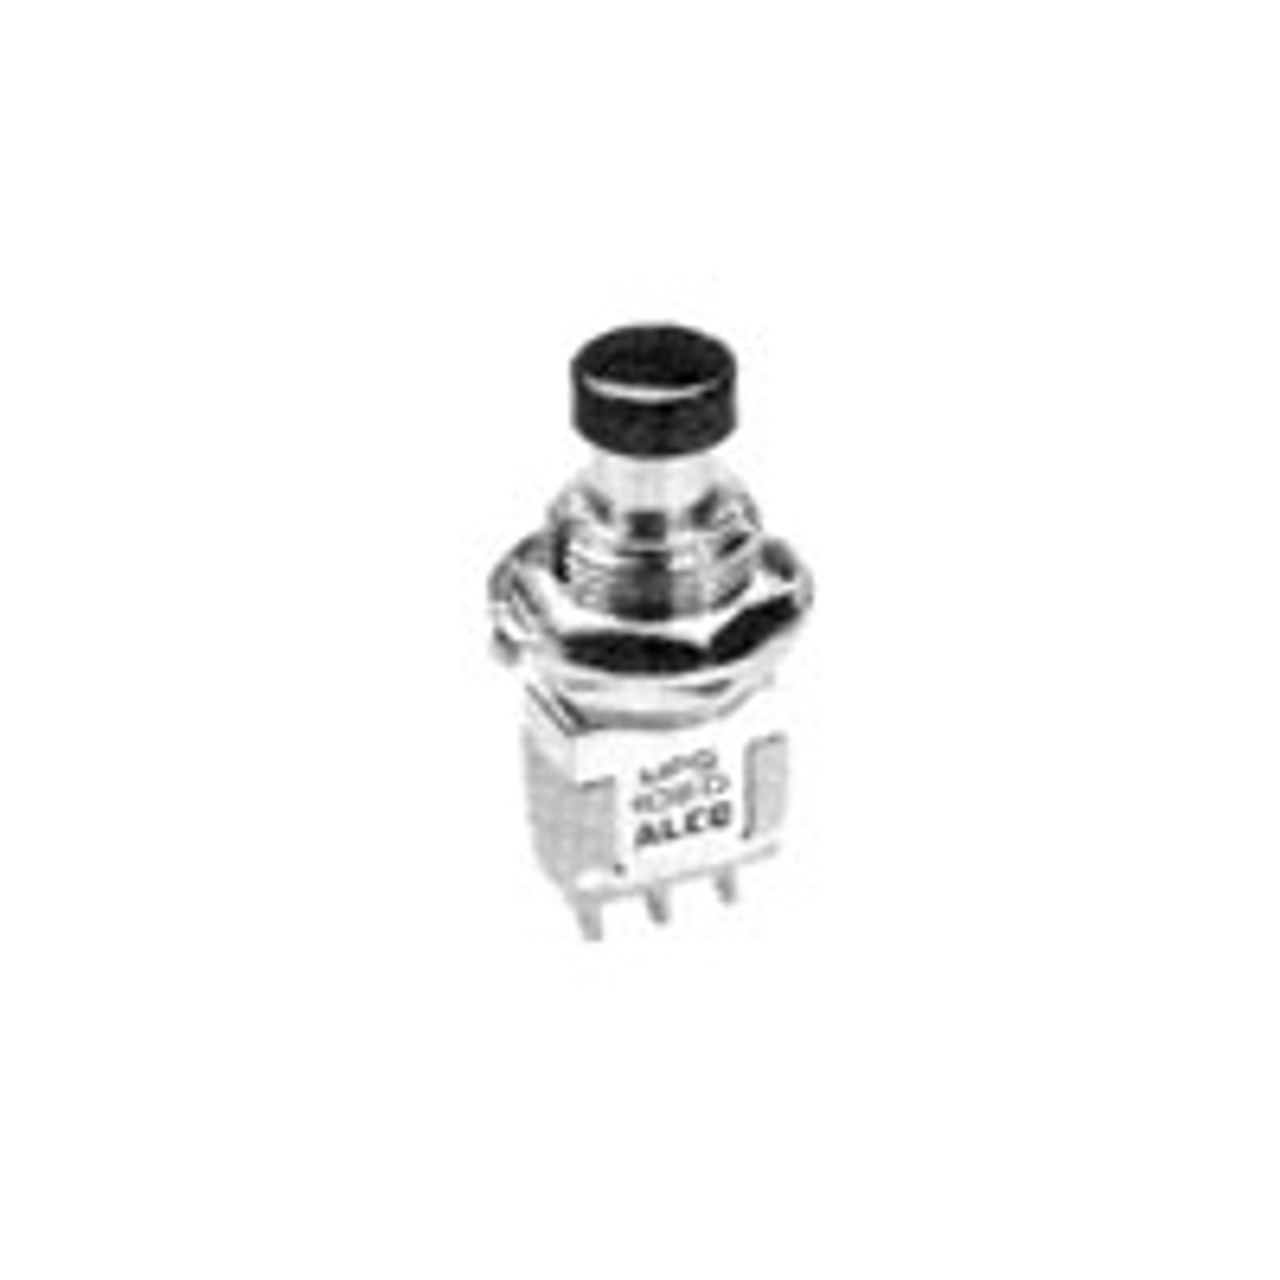 Tyco Electronics MPG106F Pushbutton Switches